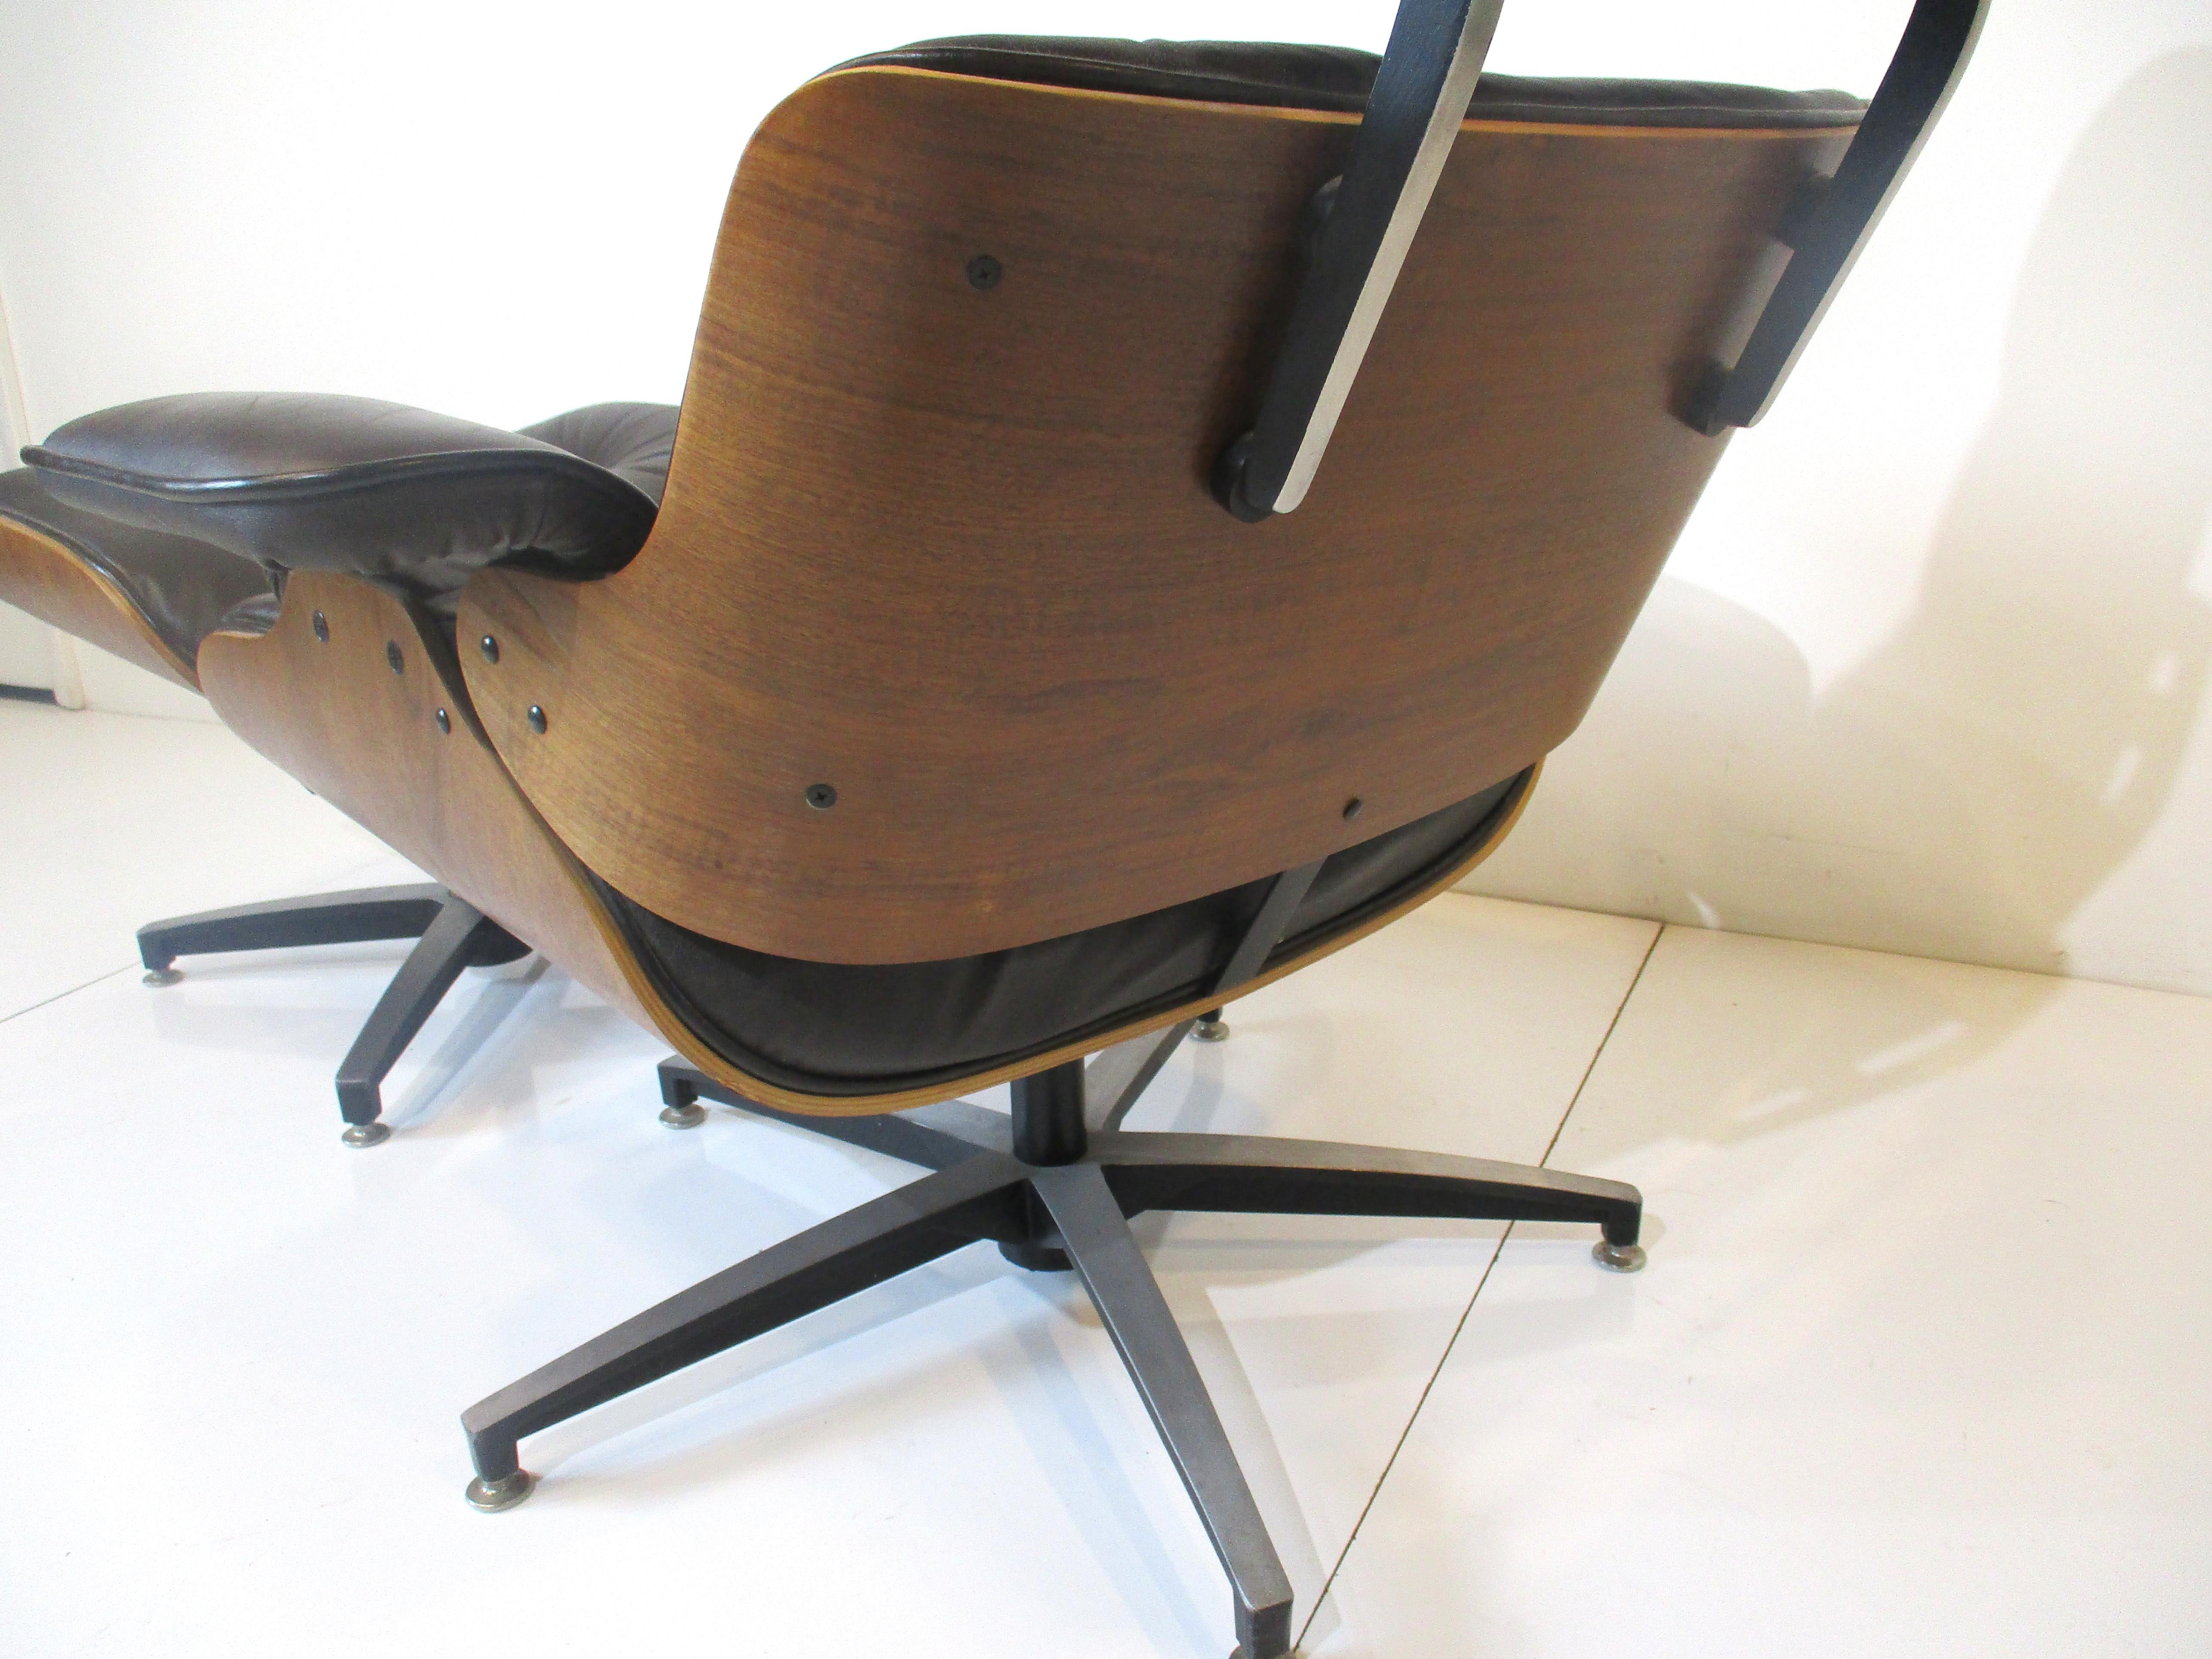 Selig Lounge Chair W/ Ottoman in Chocolate Leather in the Style of Eames 3